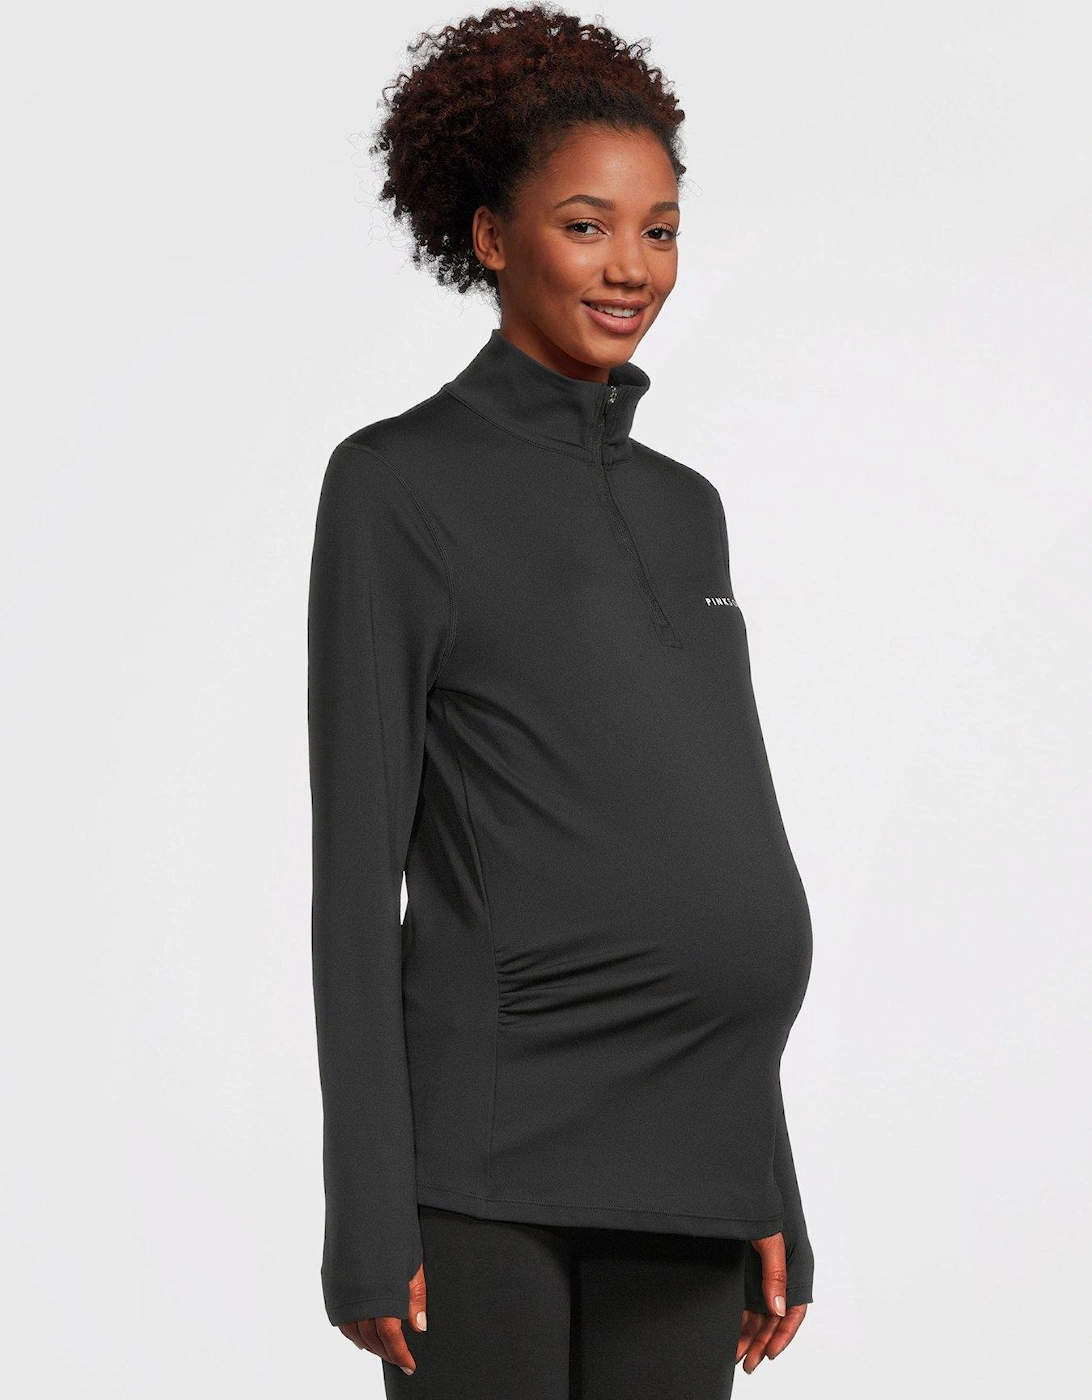 Pss Maternity Fitness Top, 3 of 2